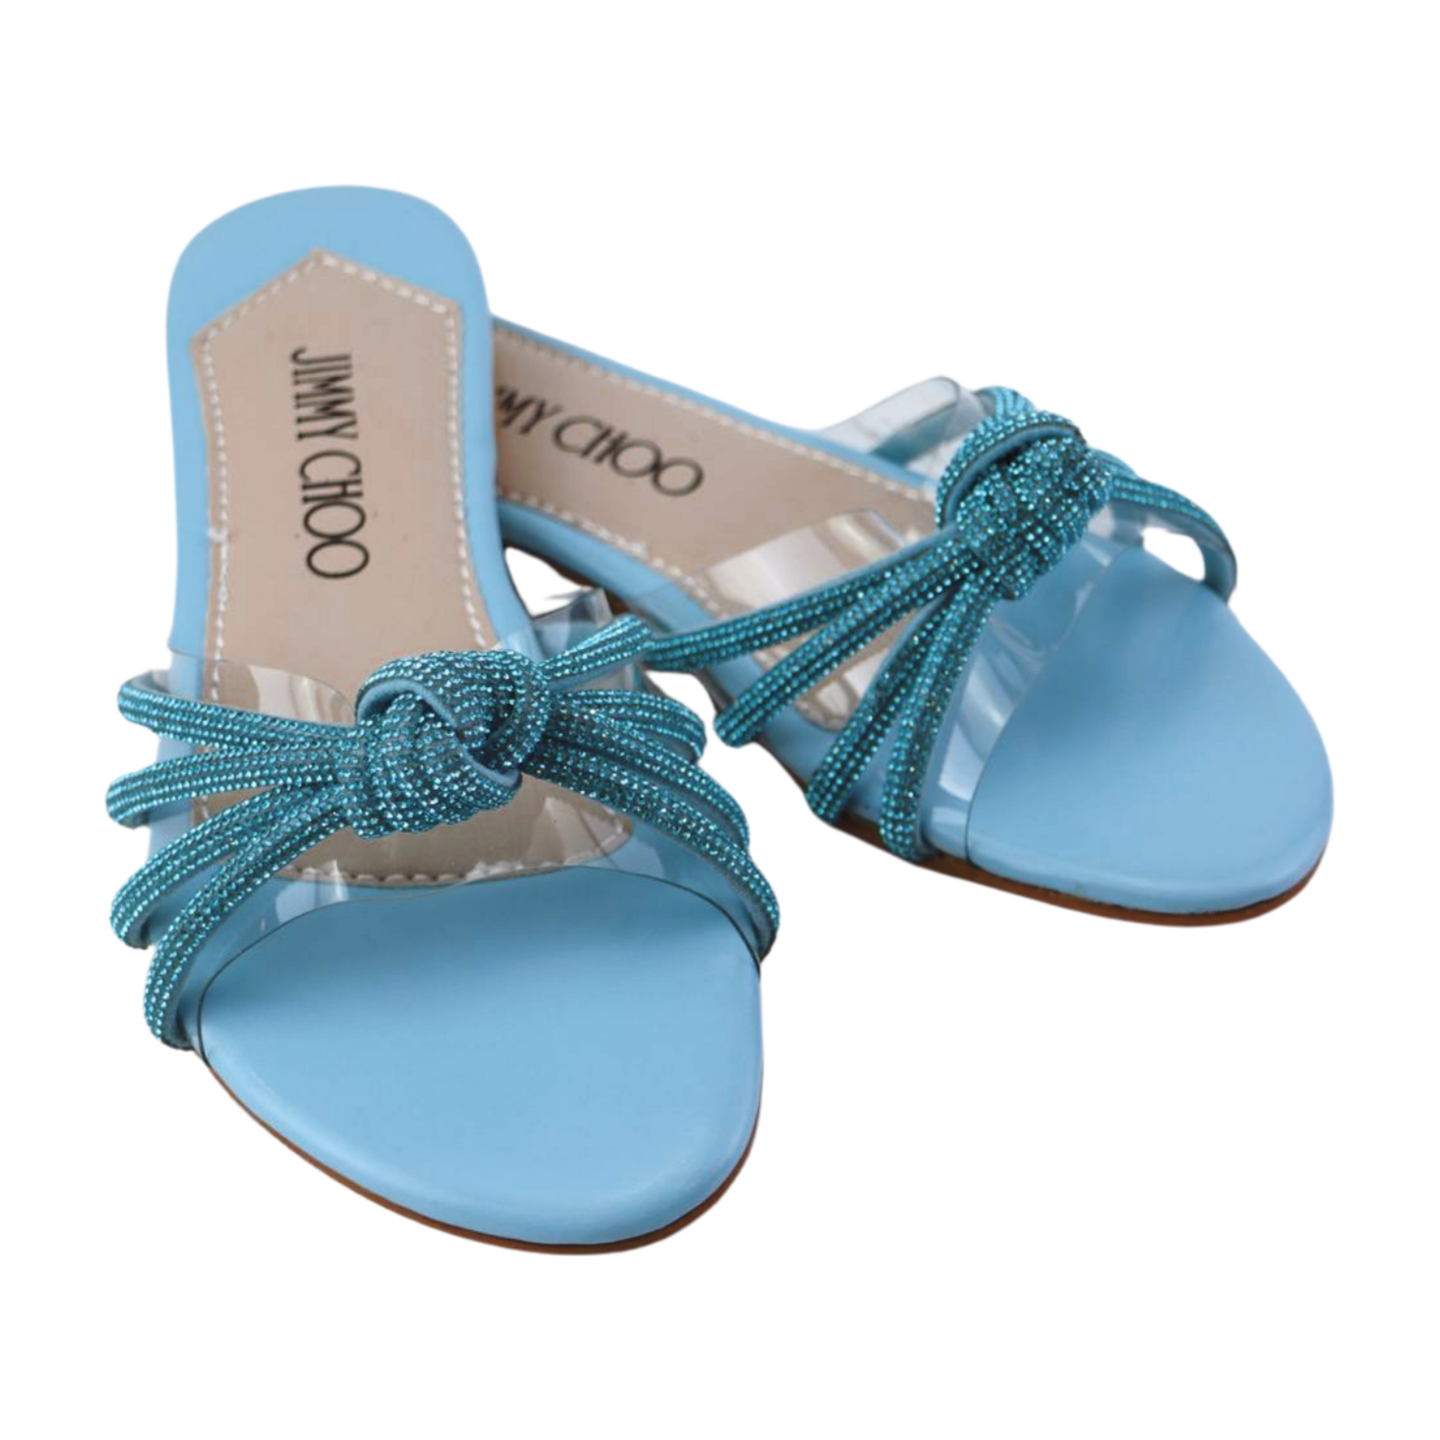 Women's Transparent Flat Sandals with Colorful Rhinestone Mesh Straps